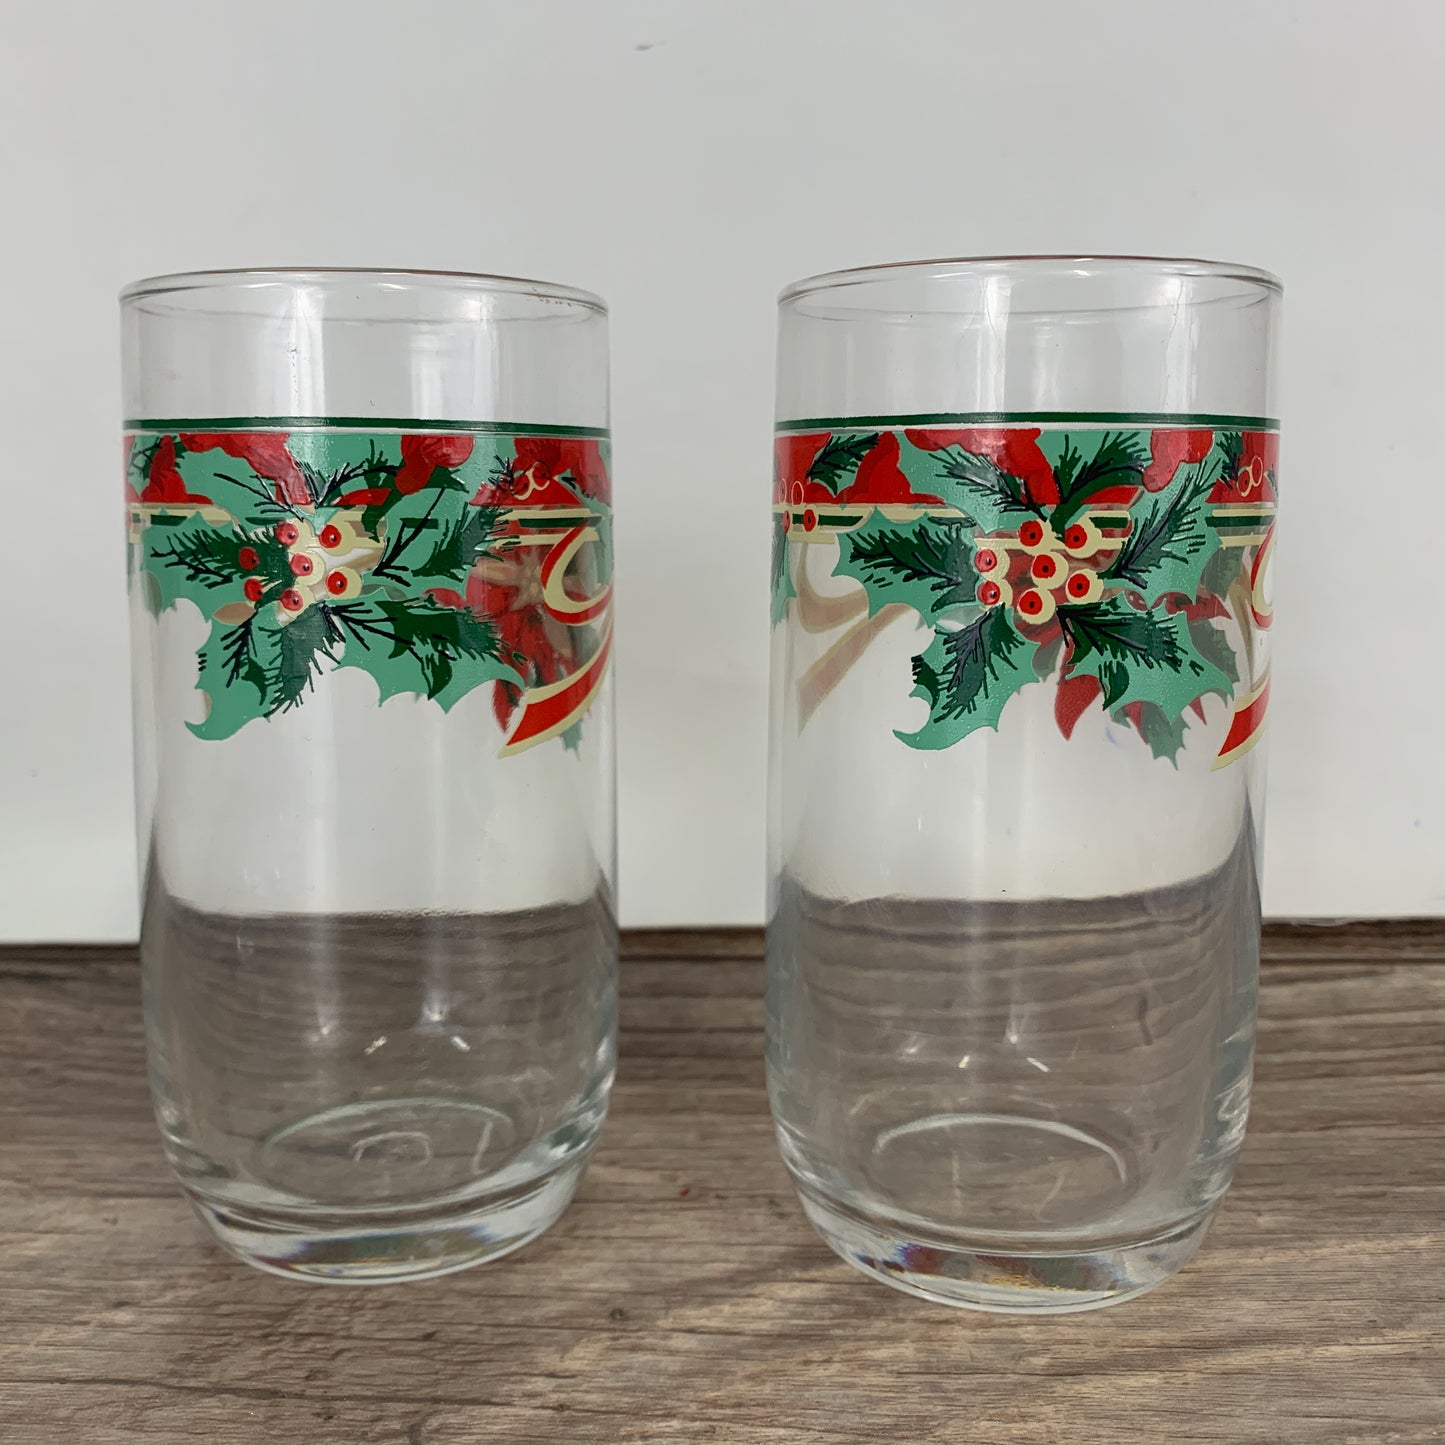 Set of 4 Christmas Tall Drinking Glasses